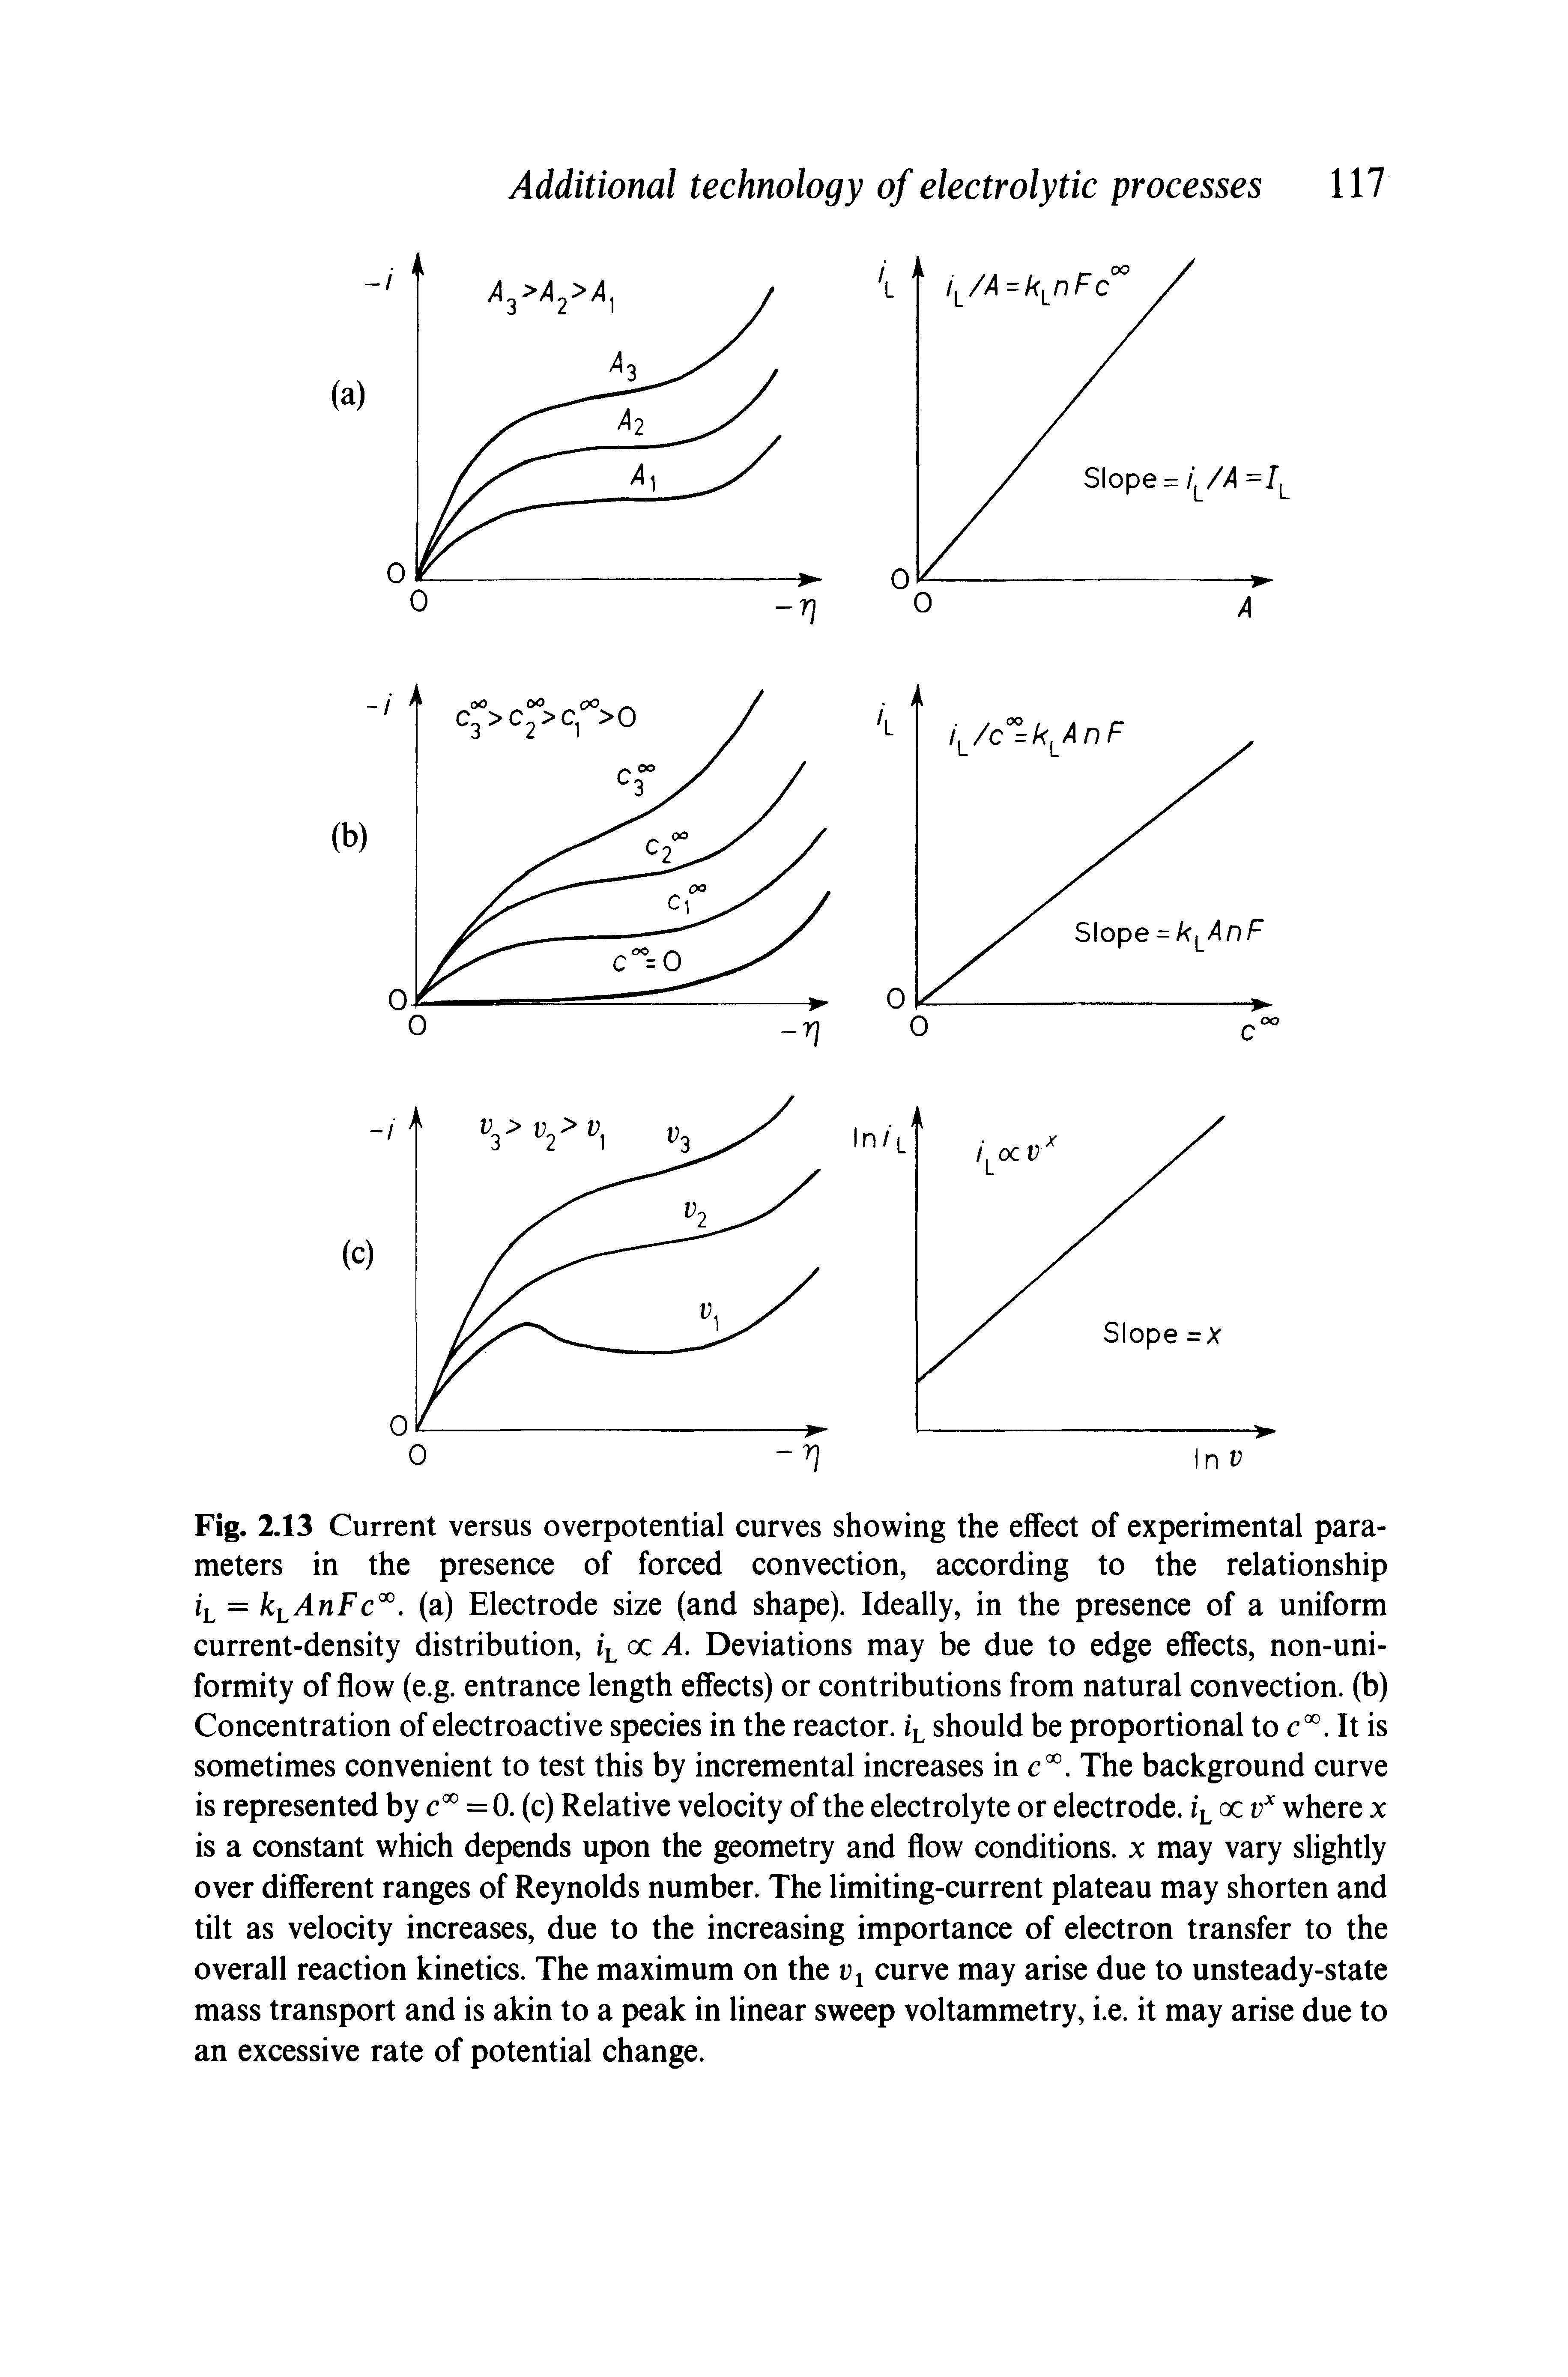 Fig. 2.13 Current versus overpotential curves showing the effect of experimental parameters in the presence of forced convection, according to the relationship = /cL lnFc. (a) Electrode size (and shape). Ideally, in the presence of a uniform current-density distribution, Deviations may be due to edge effects, non-uniformity of flow (e.g. entrance length effects) or contributions from natural convection, (b) Concentration of electroactive species in the reactor. ii should be proportional to c. It is sometimes convenient to test this by incremental increases in c . The background curve is represented by = 0. (c) Relative velocity of the electrolyte or electrode, cc where x is a constant which depends upon the geometry and flow conditions, x may vary slightly over different ranges of Reynolds number. The limiting-current plateau may shorten and tilt as velocity increases, due to the increasing importance of electron transfer to the overall reaction kinetics. The maximum on the 1 curve may arise due to unsteady-state mass transport and is akin to a peak in linear sweep voltammetry, i.e. it may arise due to an excessive rate of potential change.